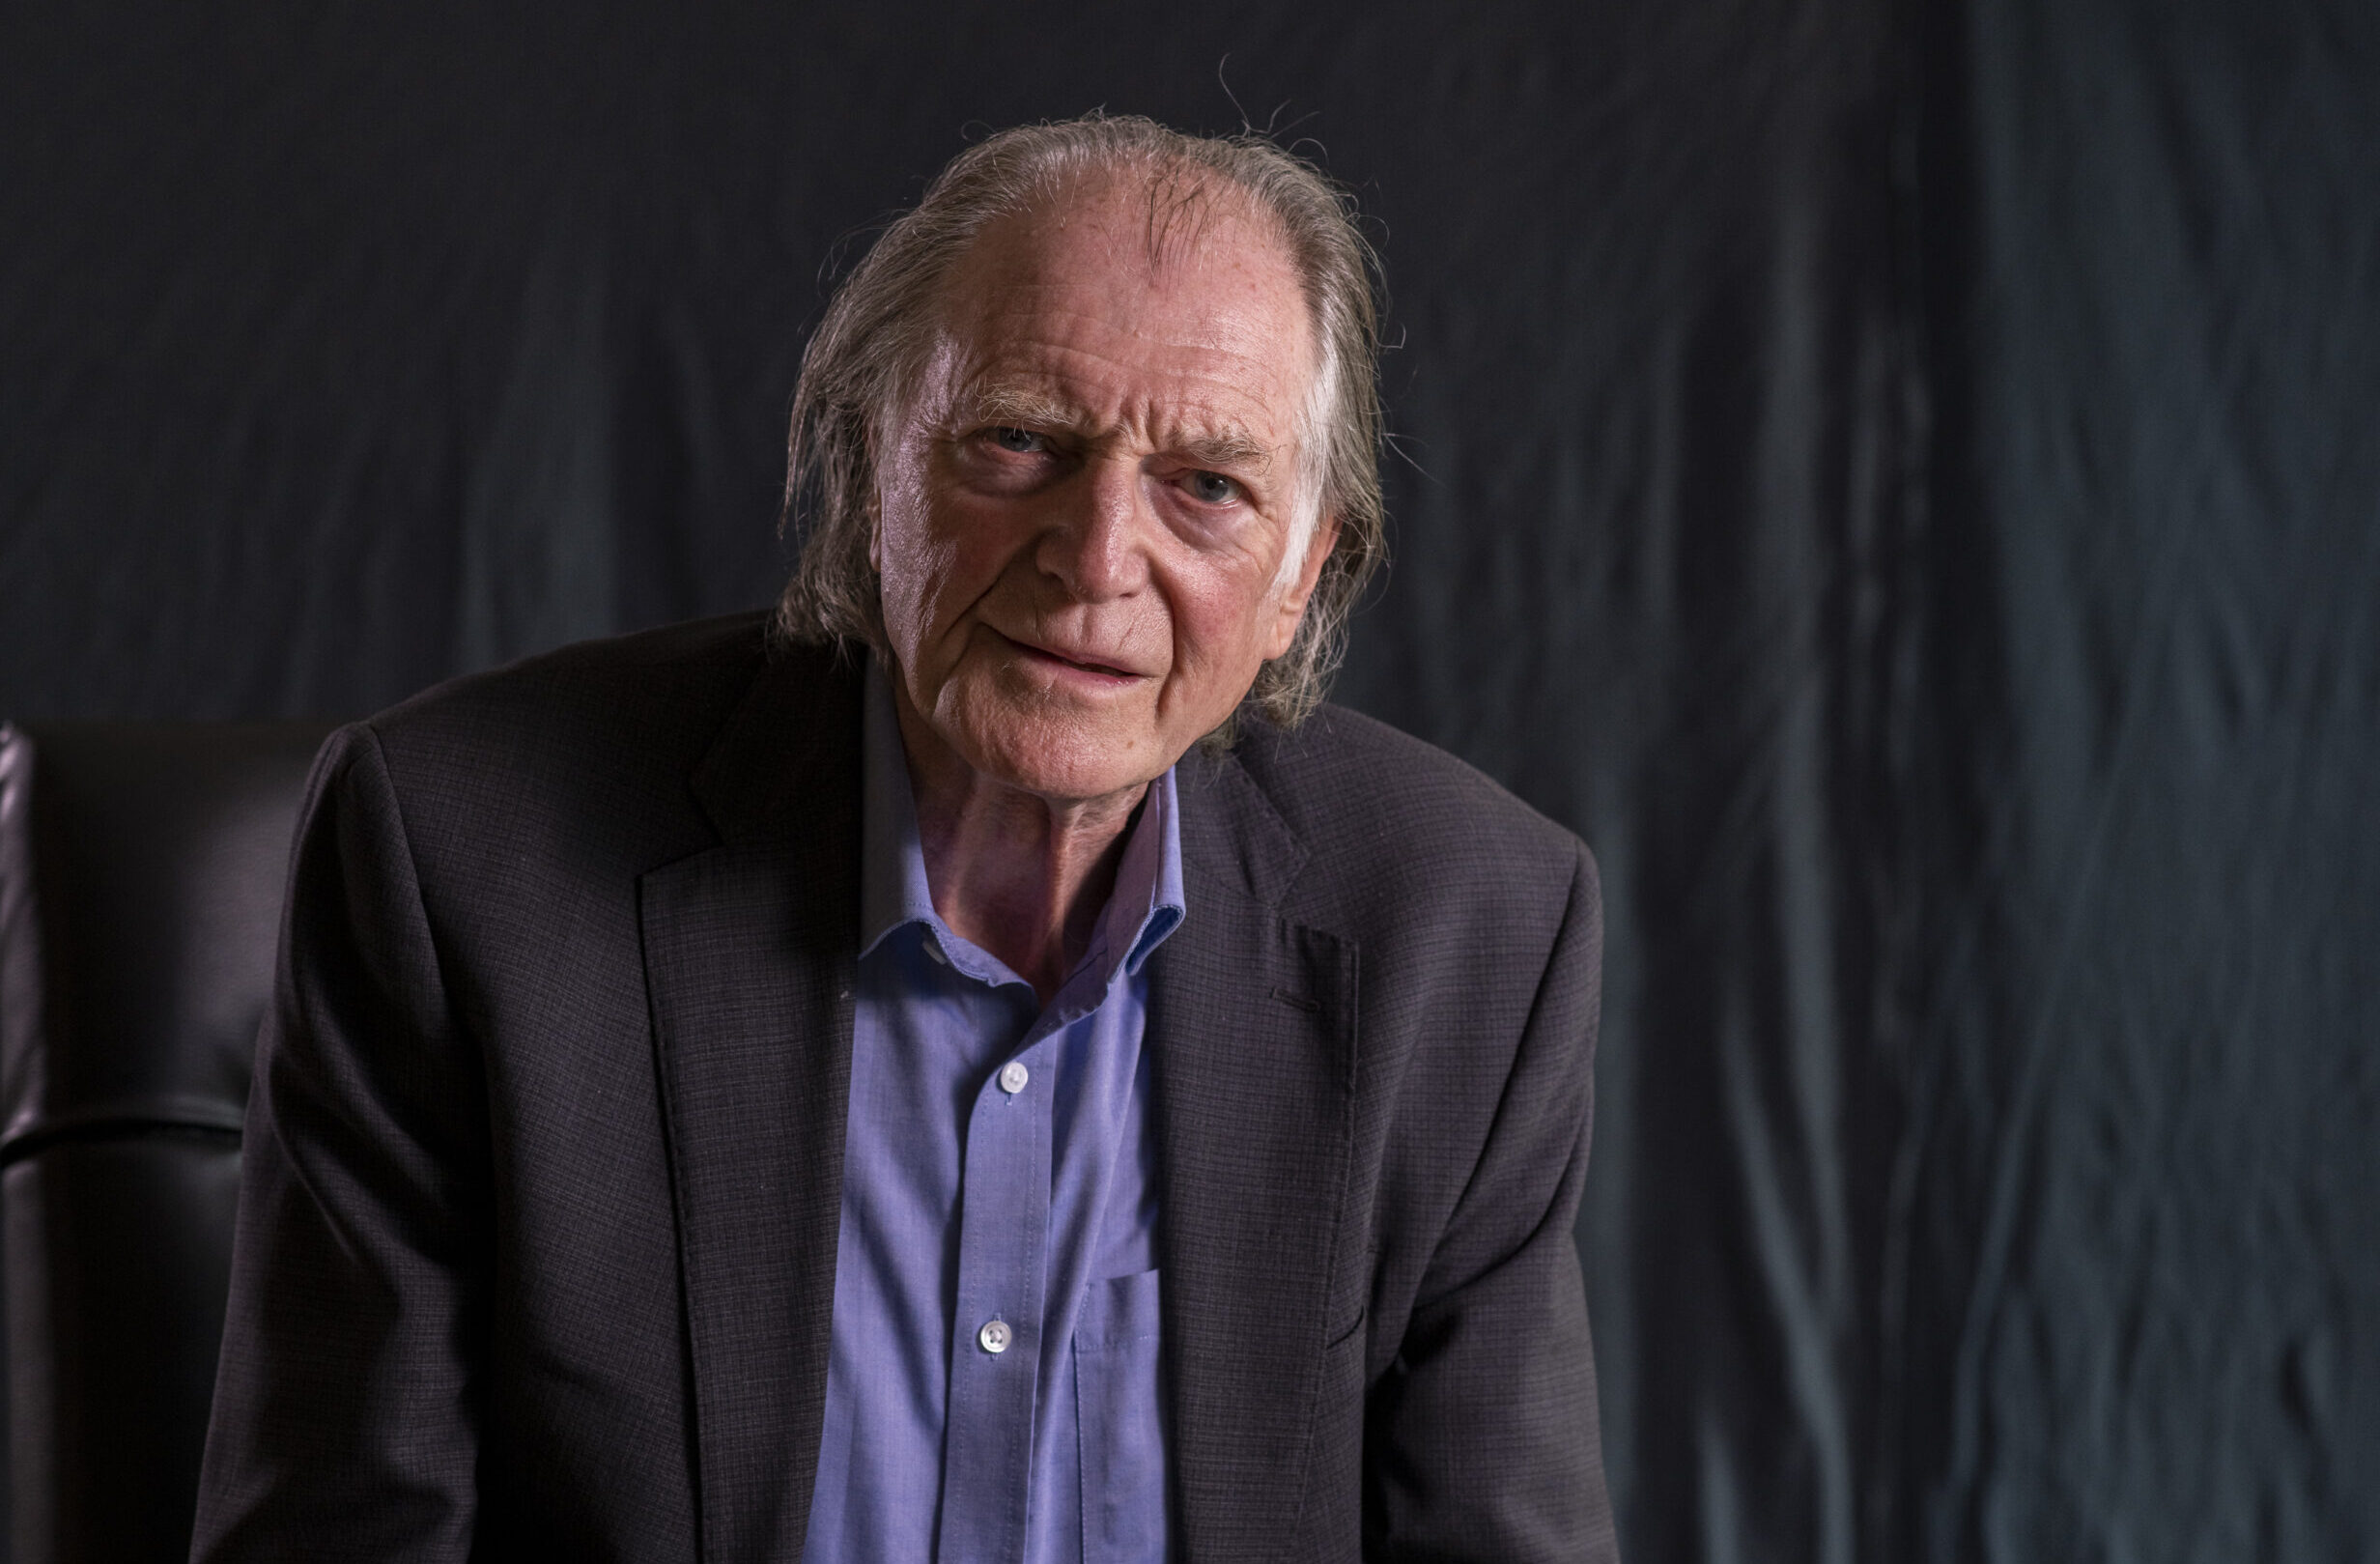 David Bradley, star of Harry Potter, looking to camera, seriously.